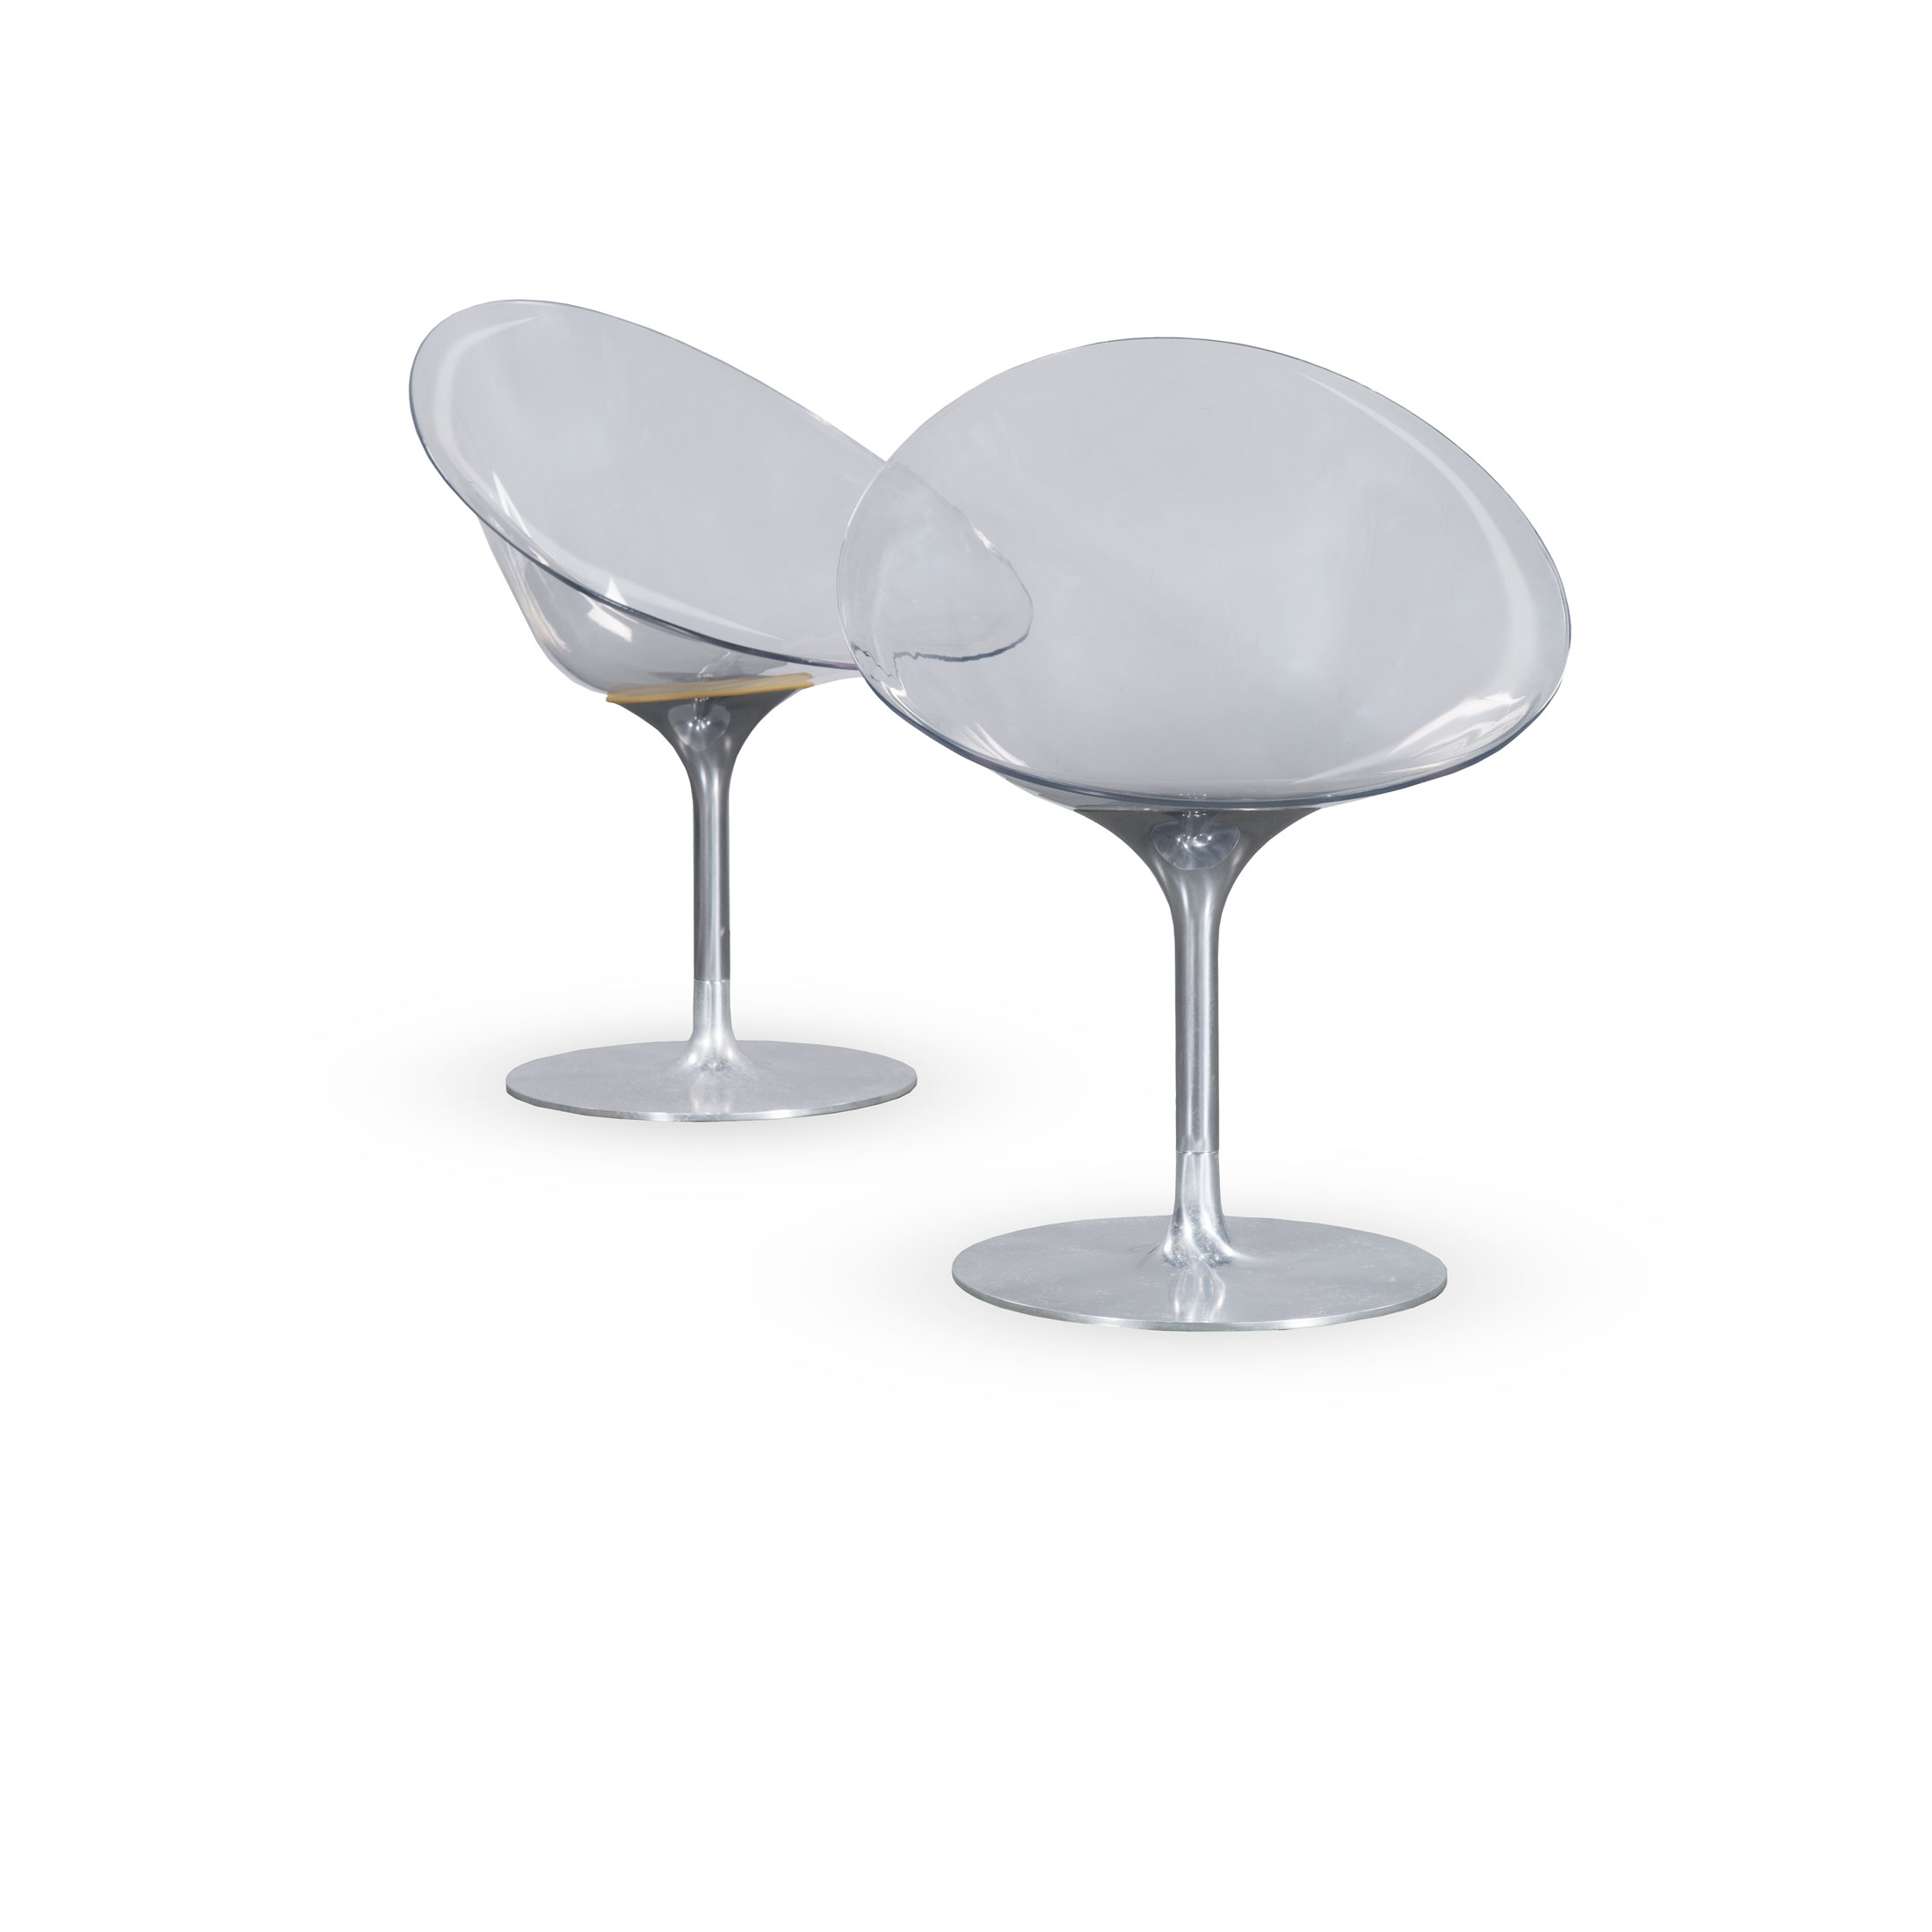 A PAIR OF EROS POLICARBONATE AND ALUMINIUM SWIVEL CHAIRS DESIGNED IN 2001 BY PHILIPPE STARK FOR